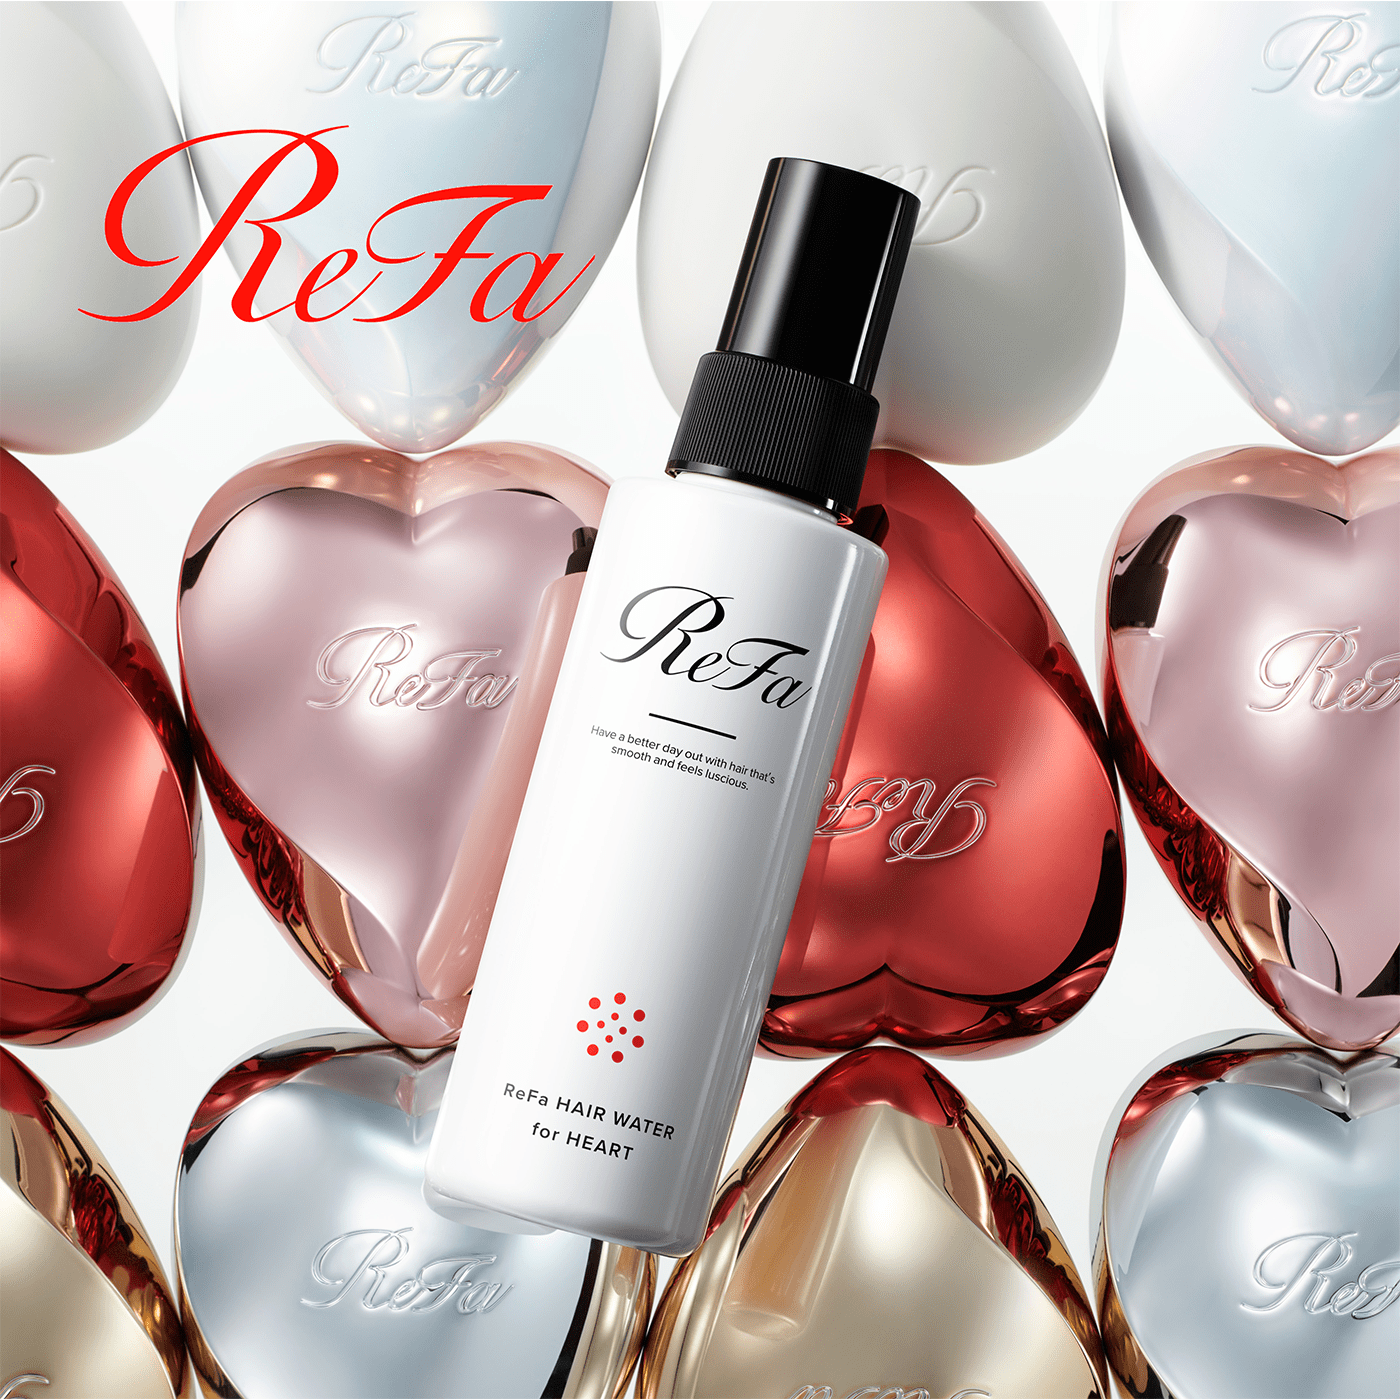 Just a quick spray on frizzy hair is enough keep it smooth for ages. Introducing the ReFa HAIR WATER for HEART.